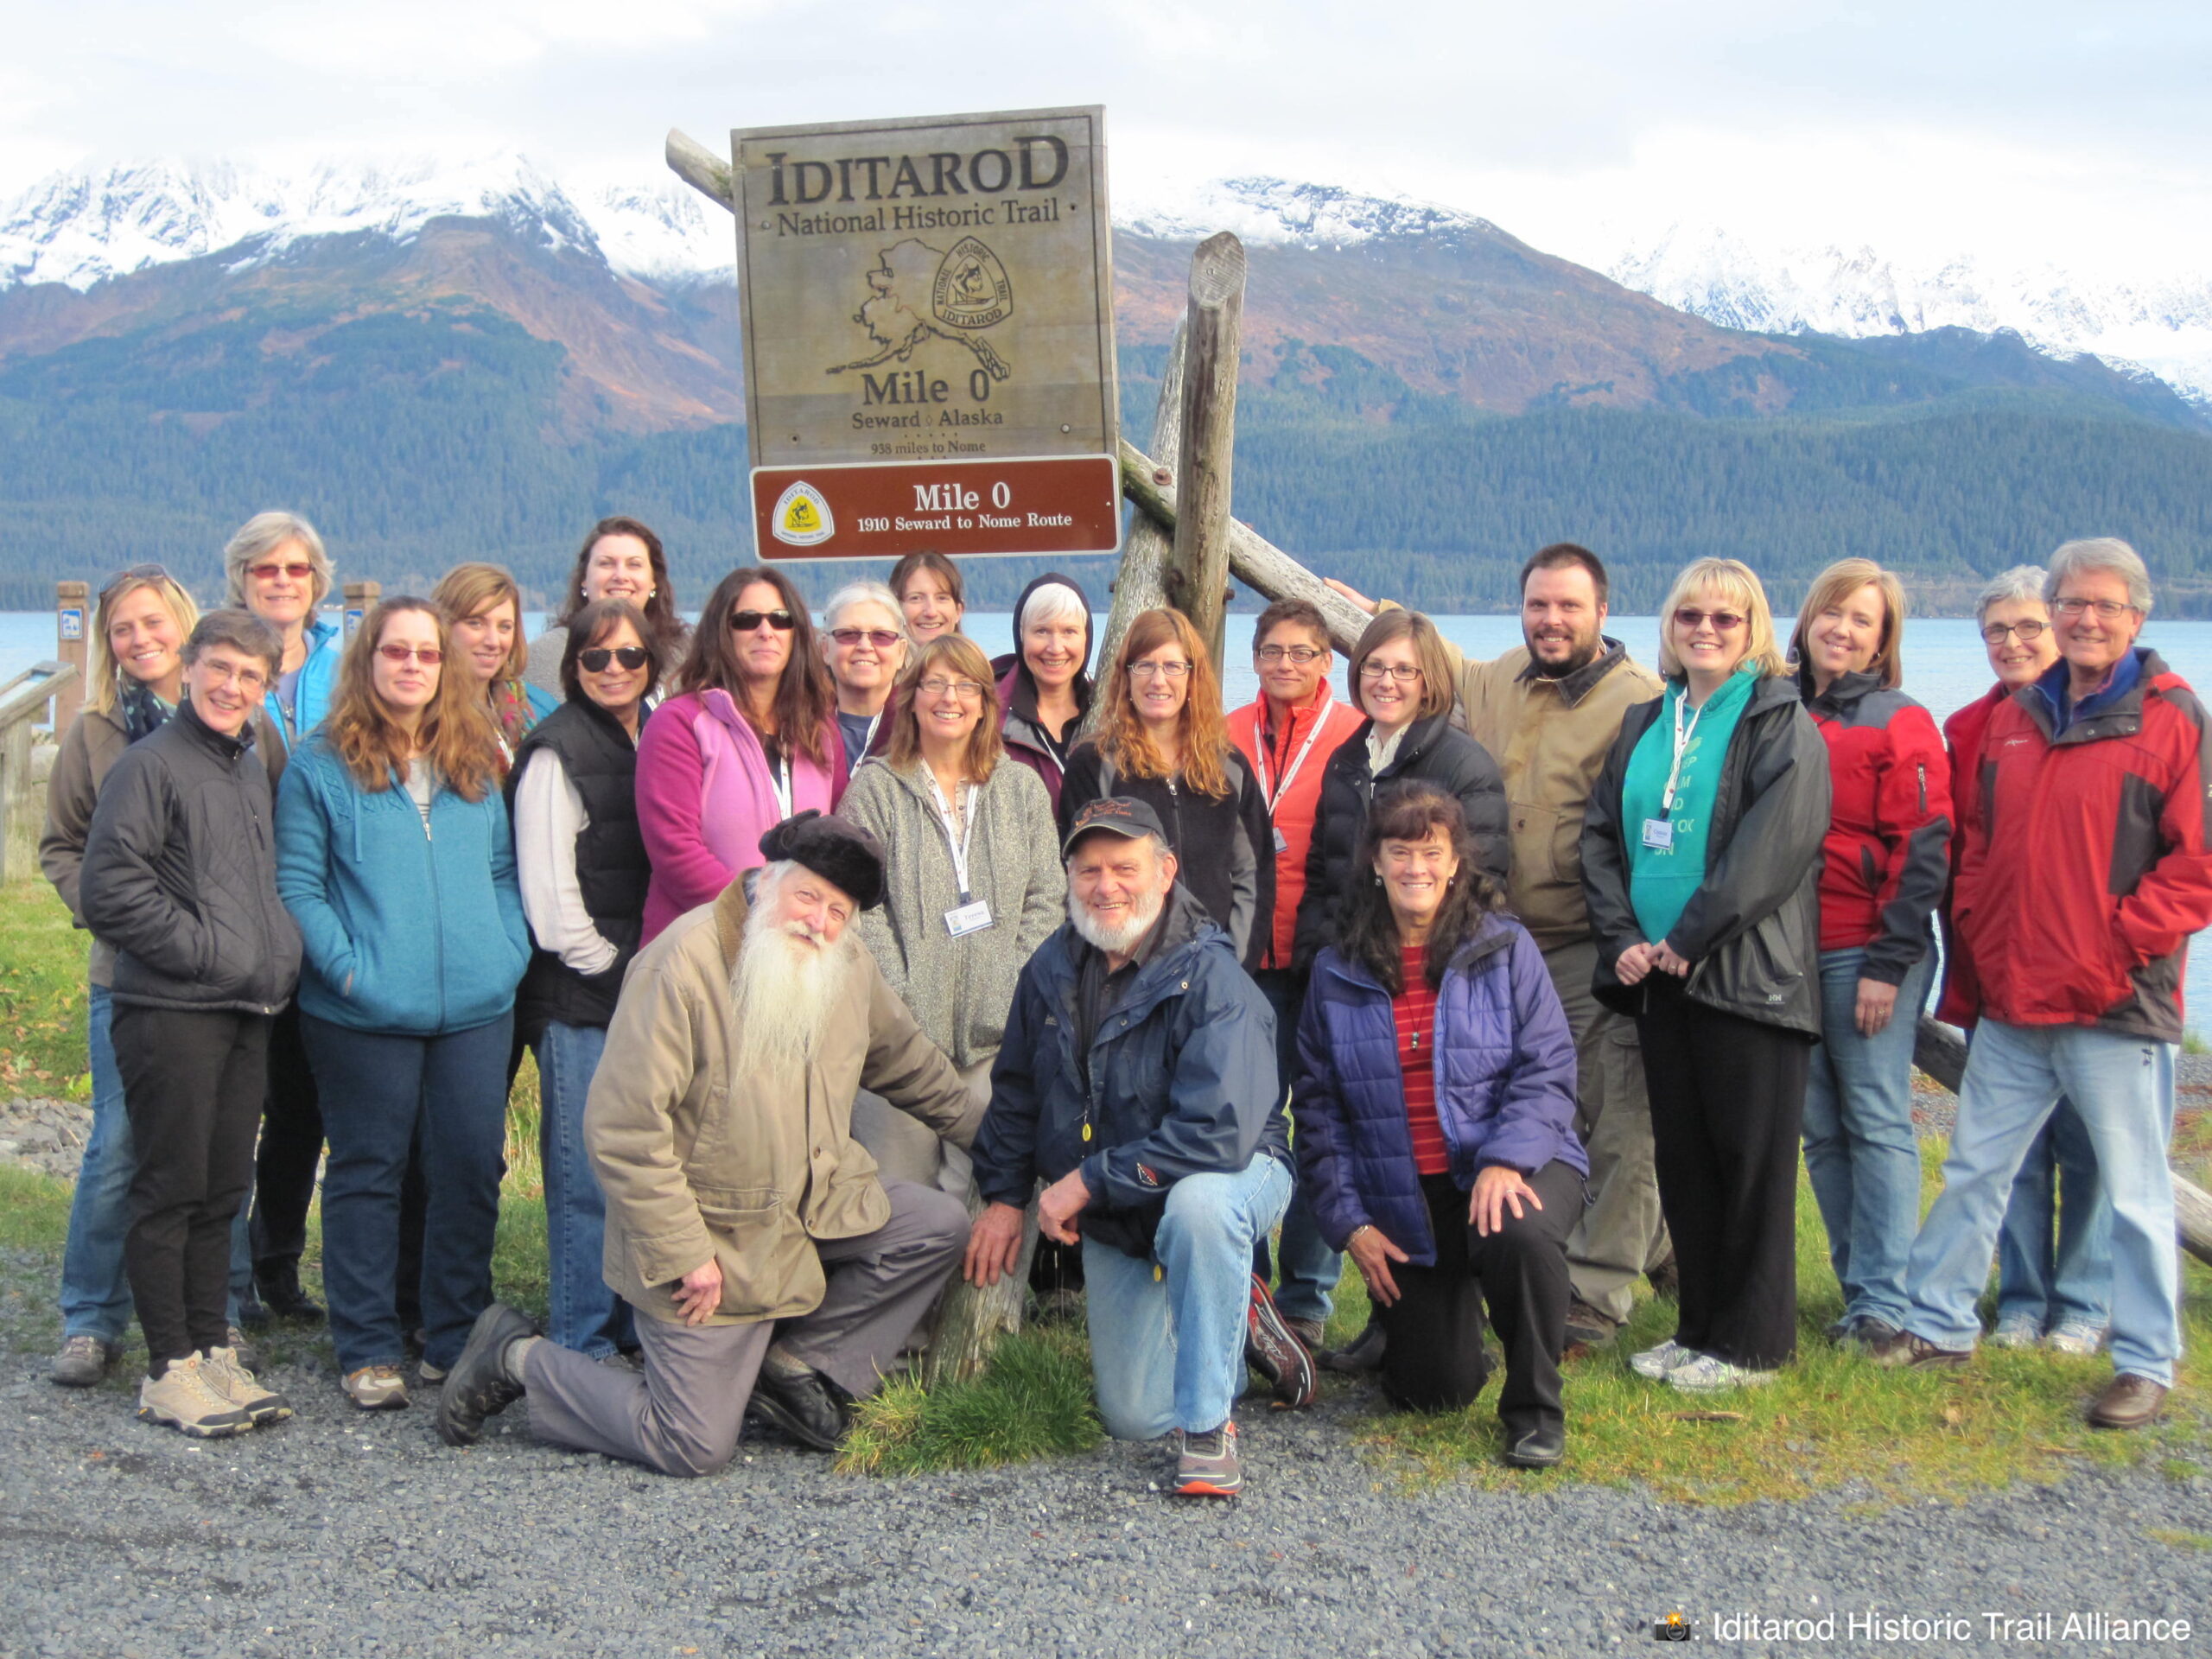 Teachers, trainers, local historians and an Iditarod dog musher stand together in Seward, Alaska at an iTREC! workshop. Mile zero of the Iditarod National Historic Trail.